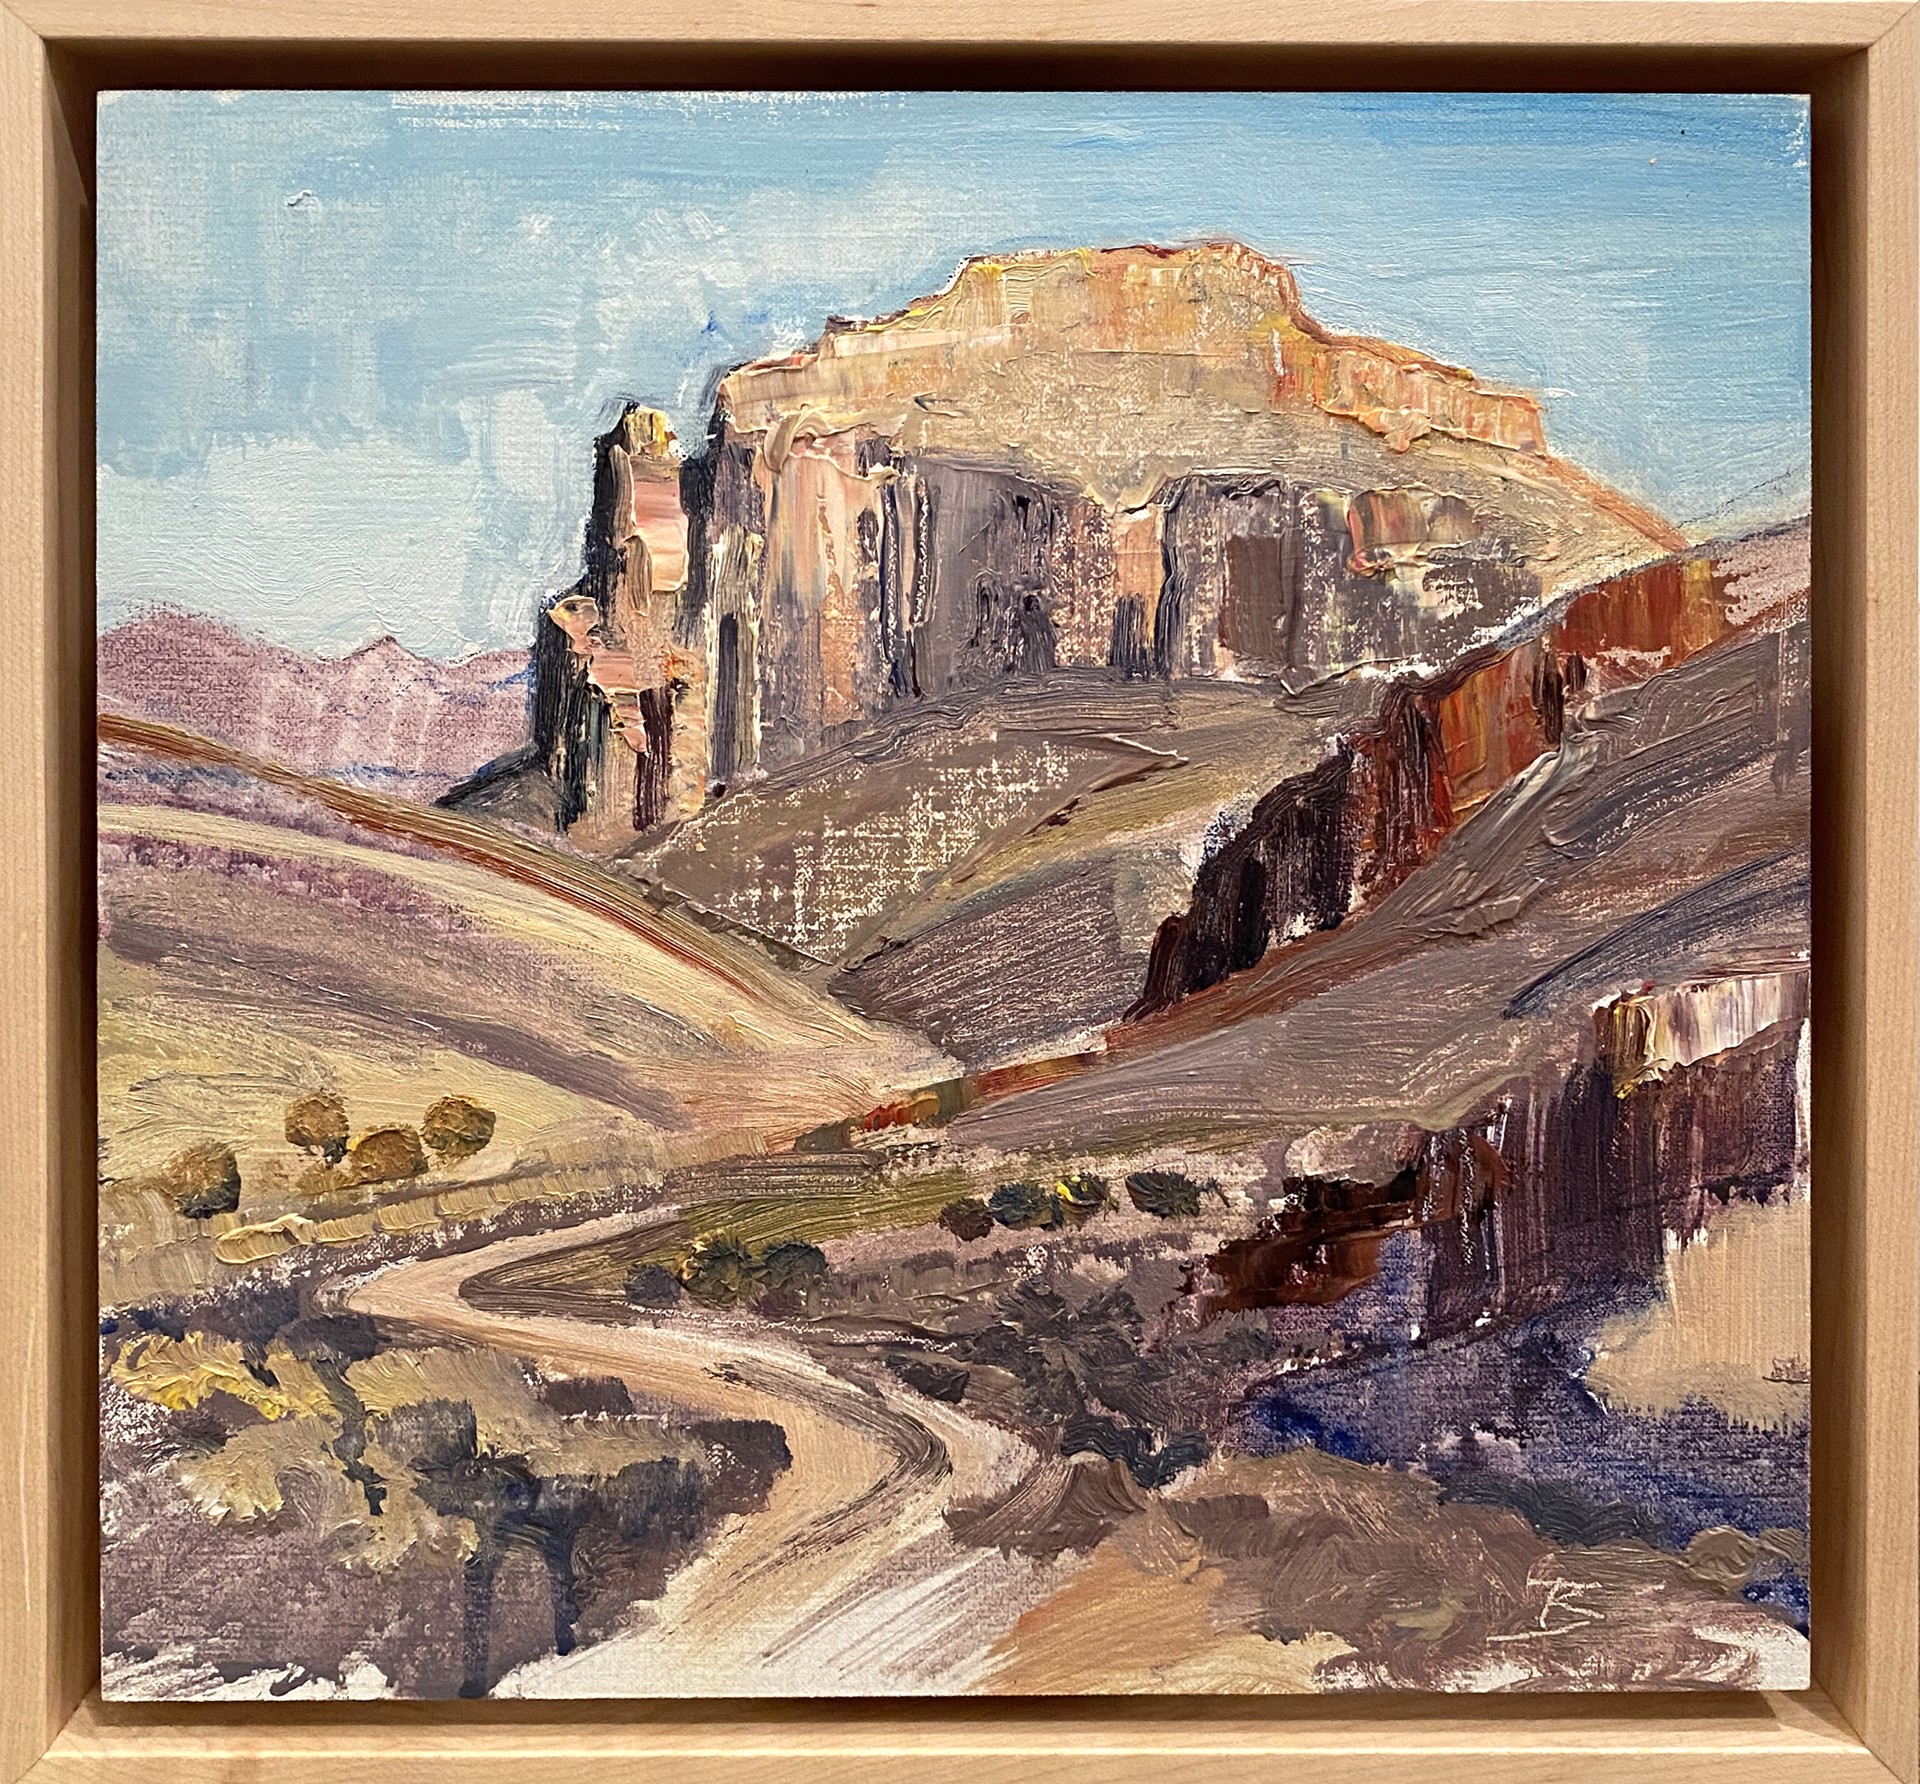 Pinto Canyon #27 by Mary Baxter